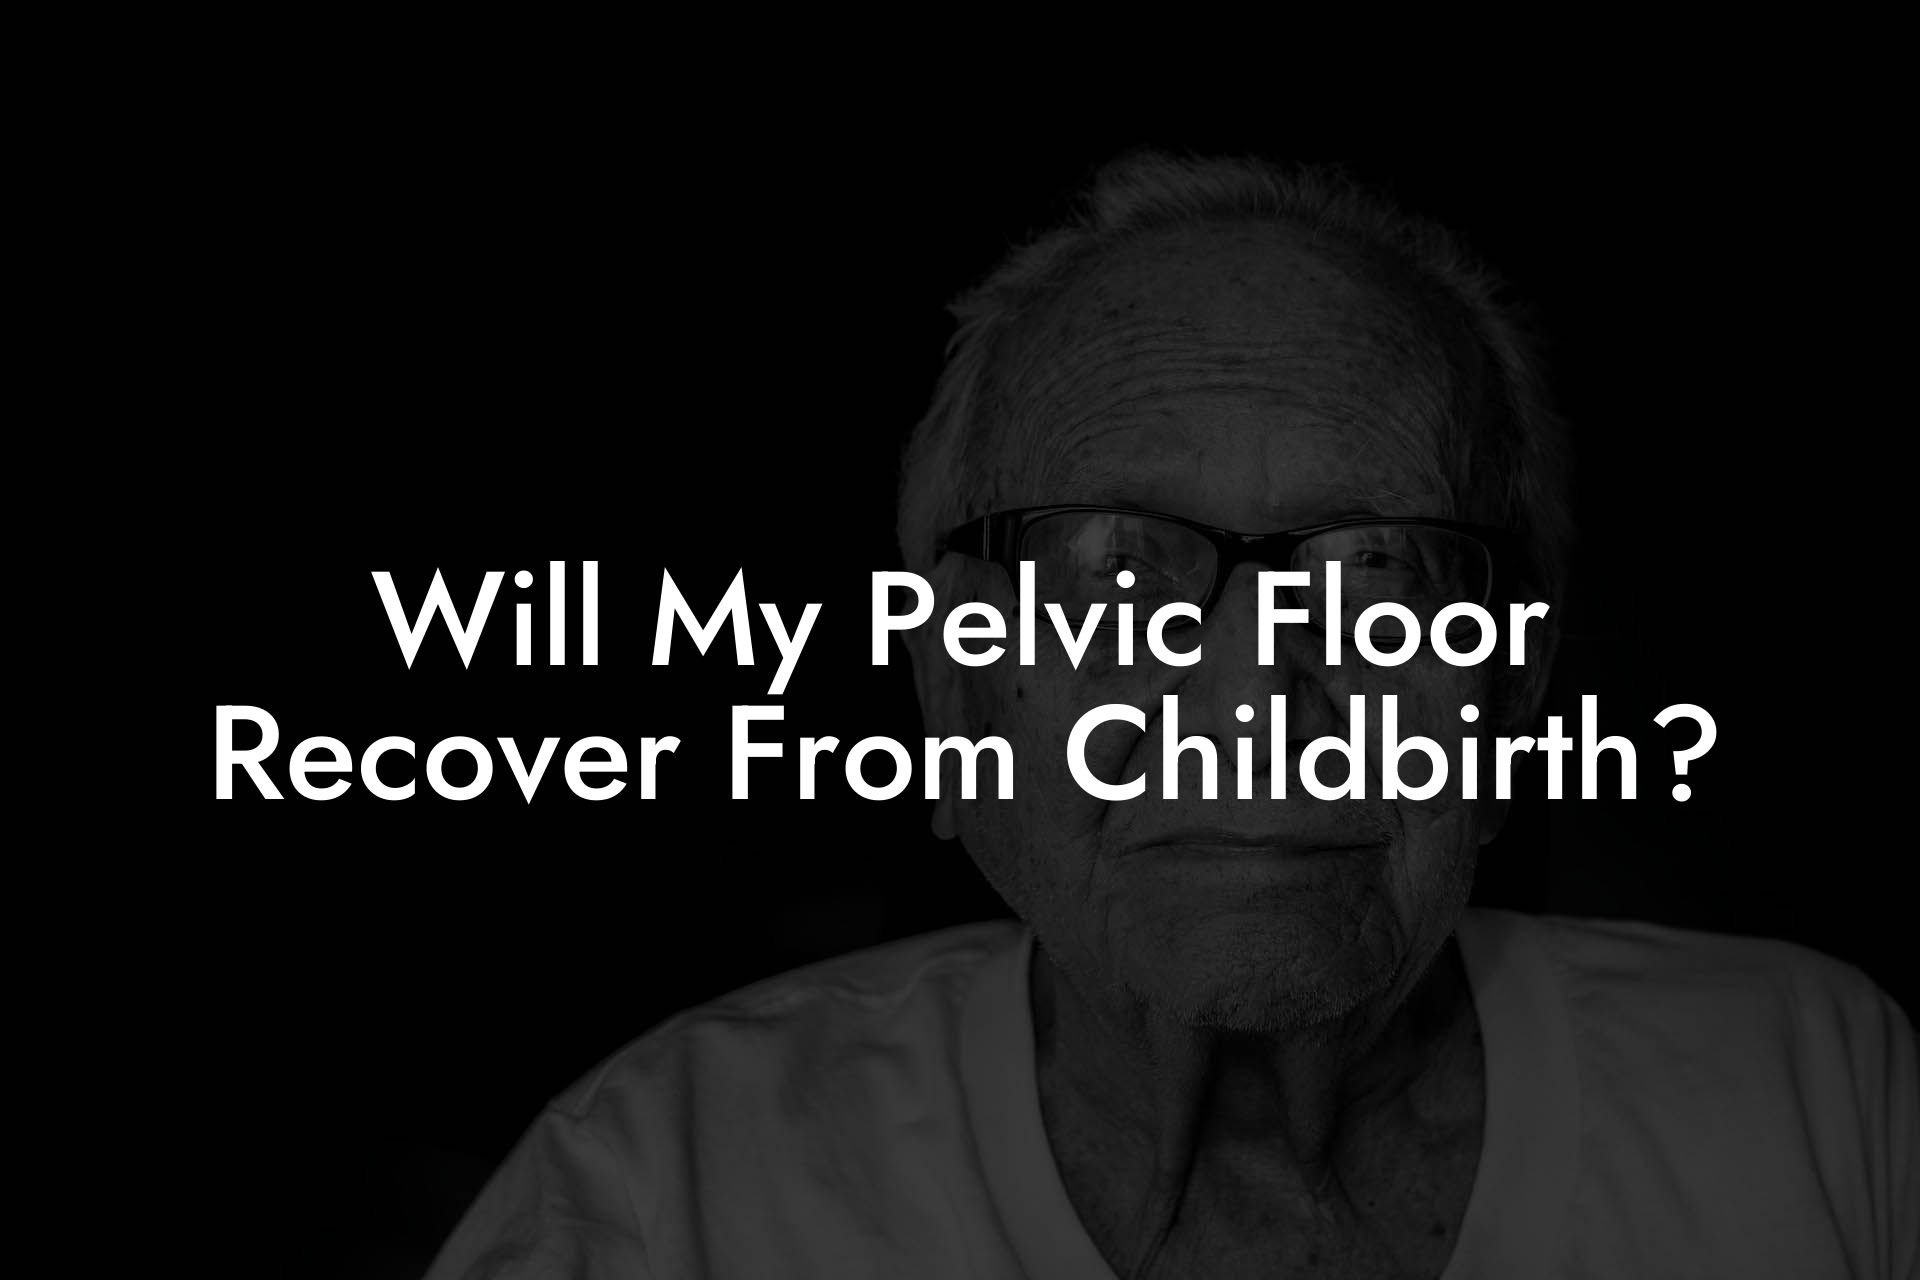 Will My Pelvic Floor Recover From Childbirth?